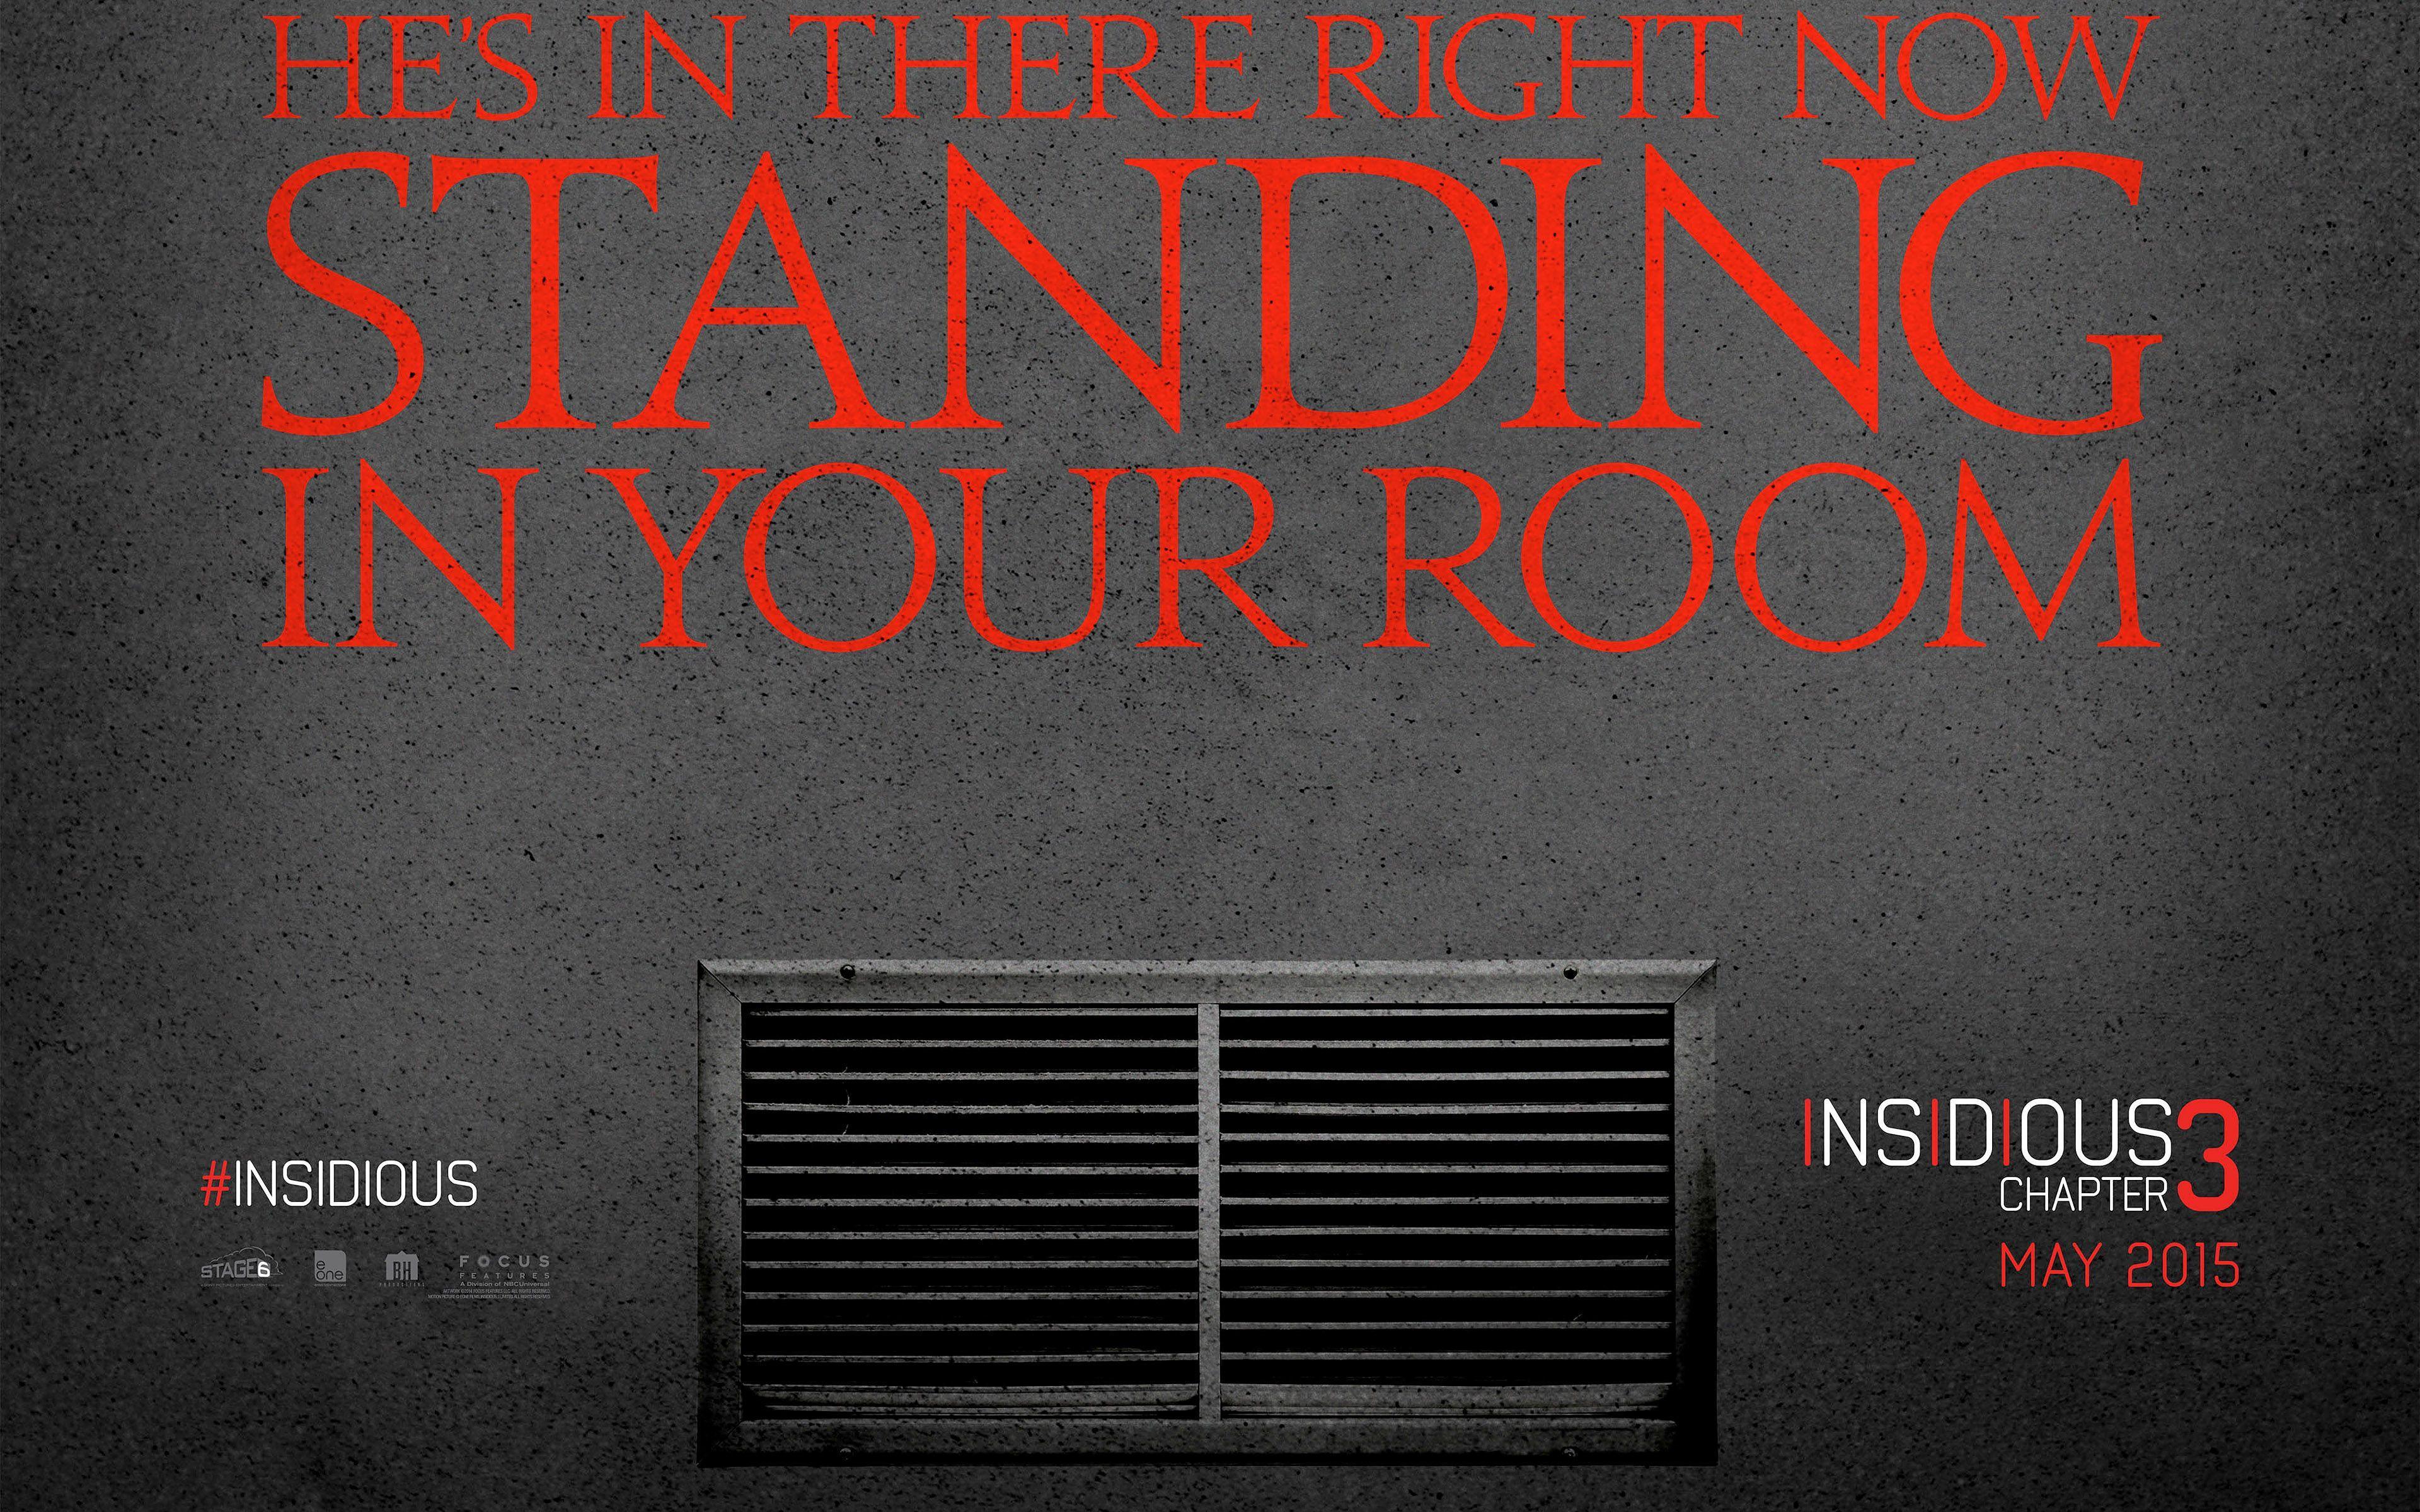 Insidious: Chapter 3 Movie Wallpaper